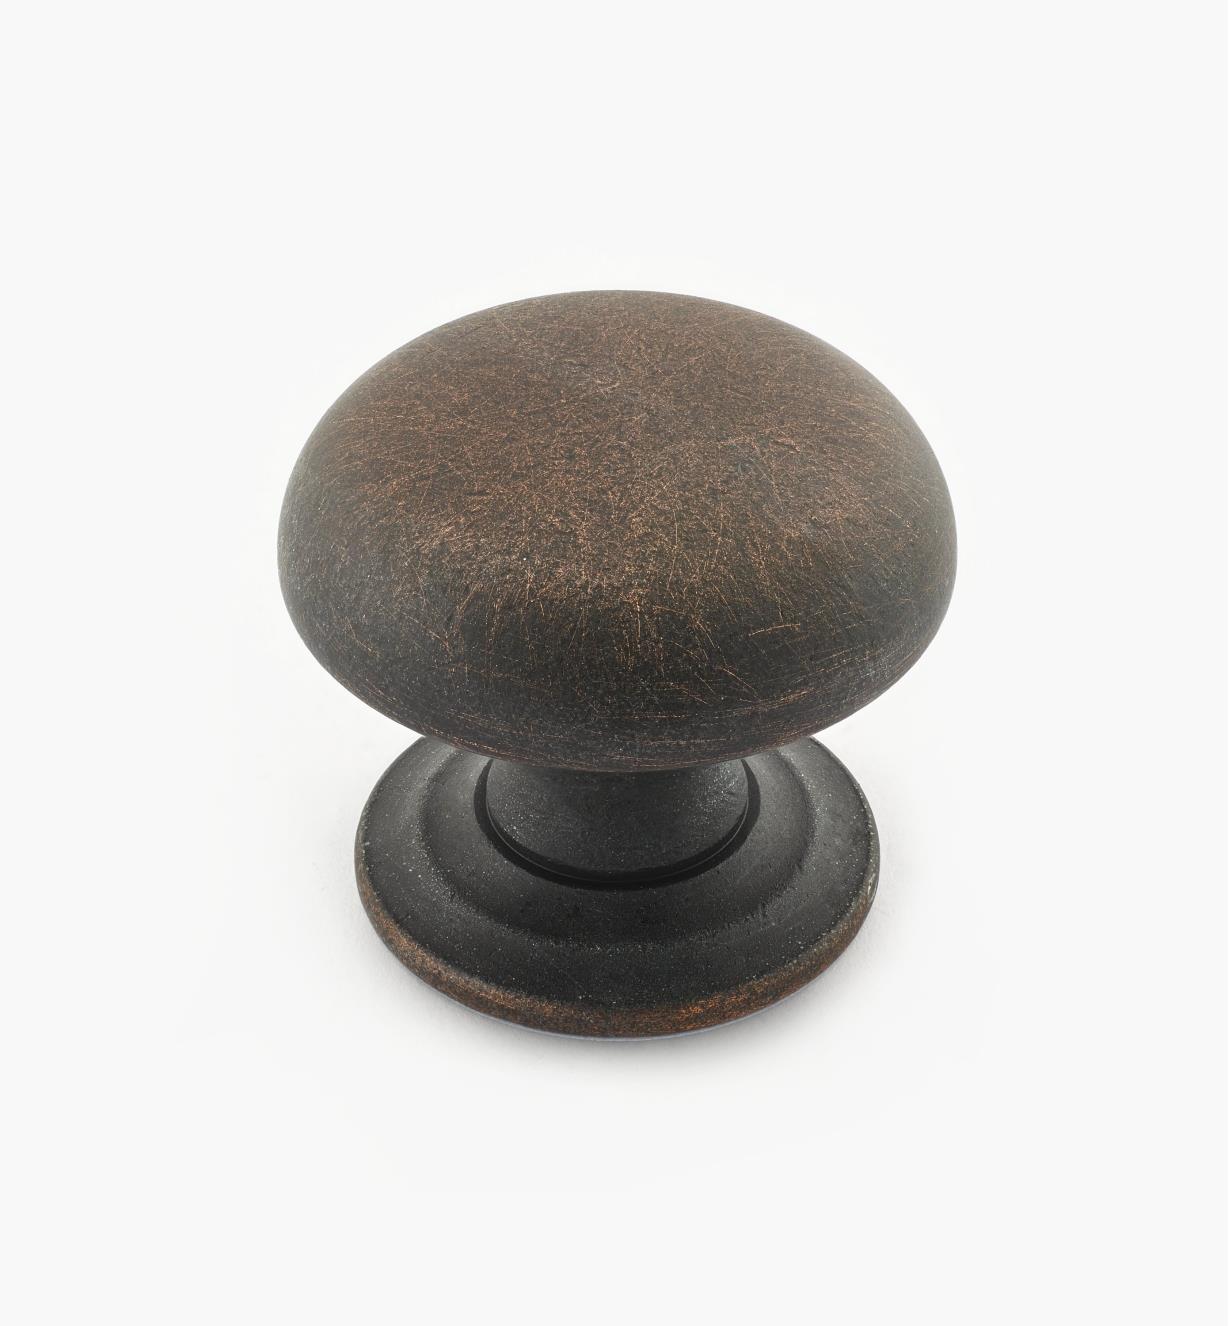 02W3269 - Weathered Bronze Suite - 1 1/2" x 1 1/4" Turned Brass Dome Knob